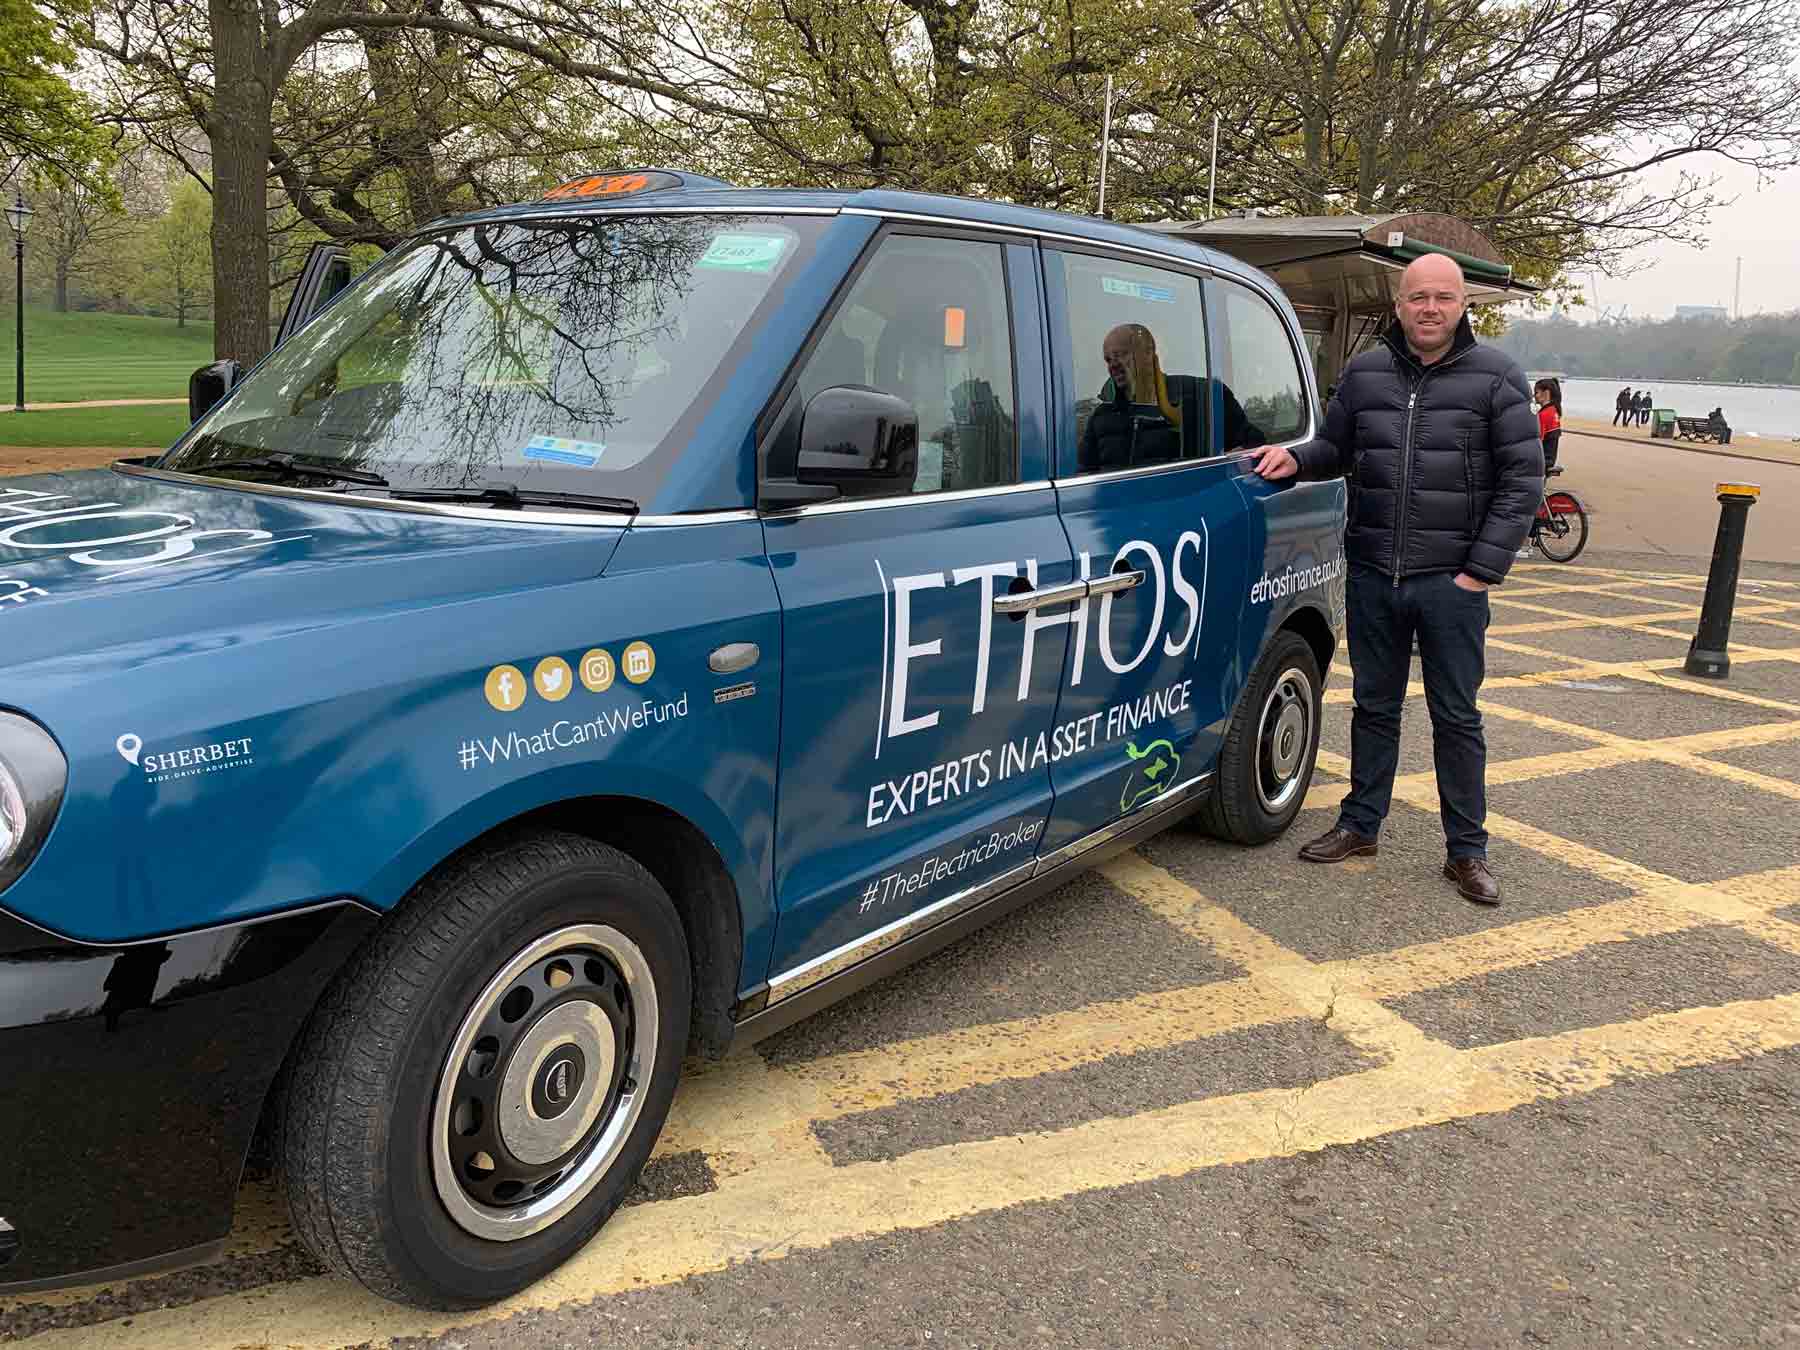 Taxi! Ethos Asset Finance MD Chris Brown with the new Ethos Asset Finance LEVC black cab